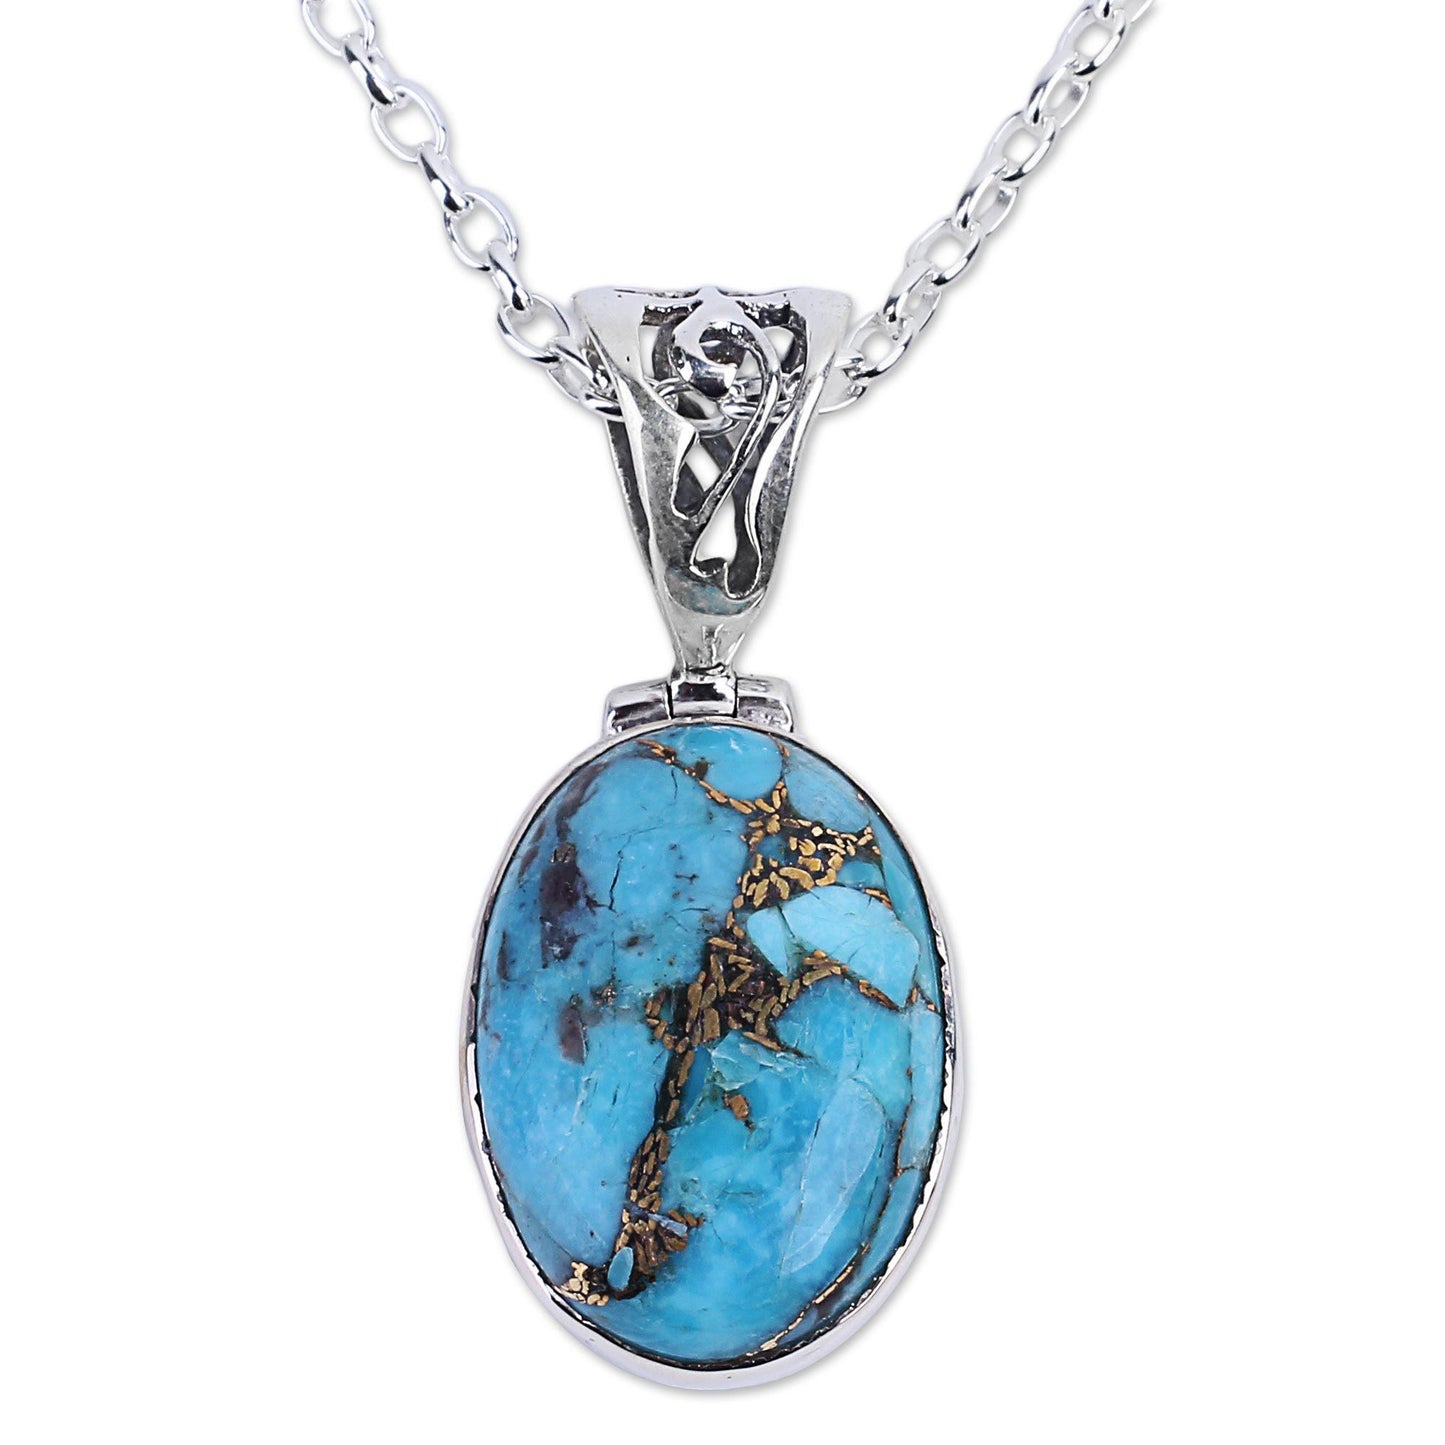 Mystical Turquoise Oval Pendant Necklace